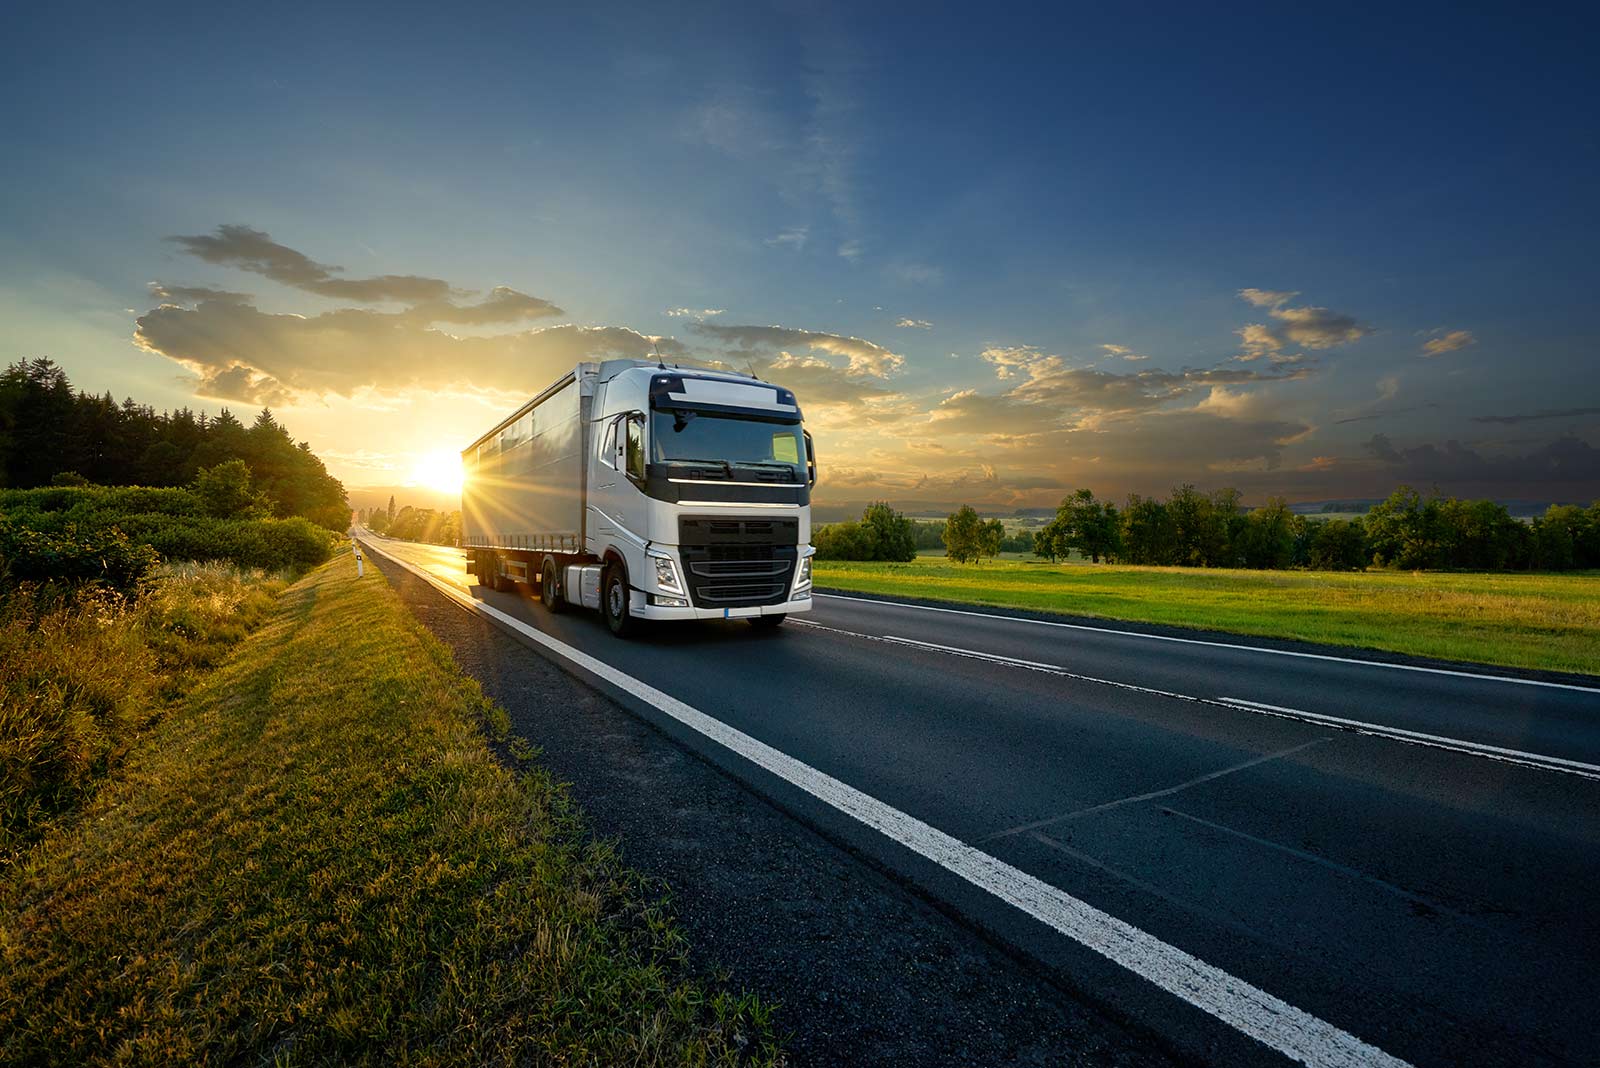 A HGV truck at sunrise or sunset